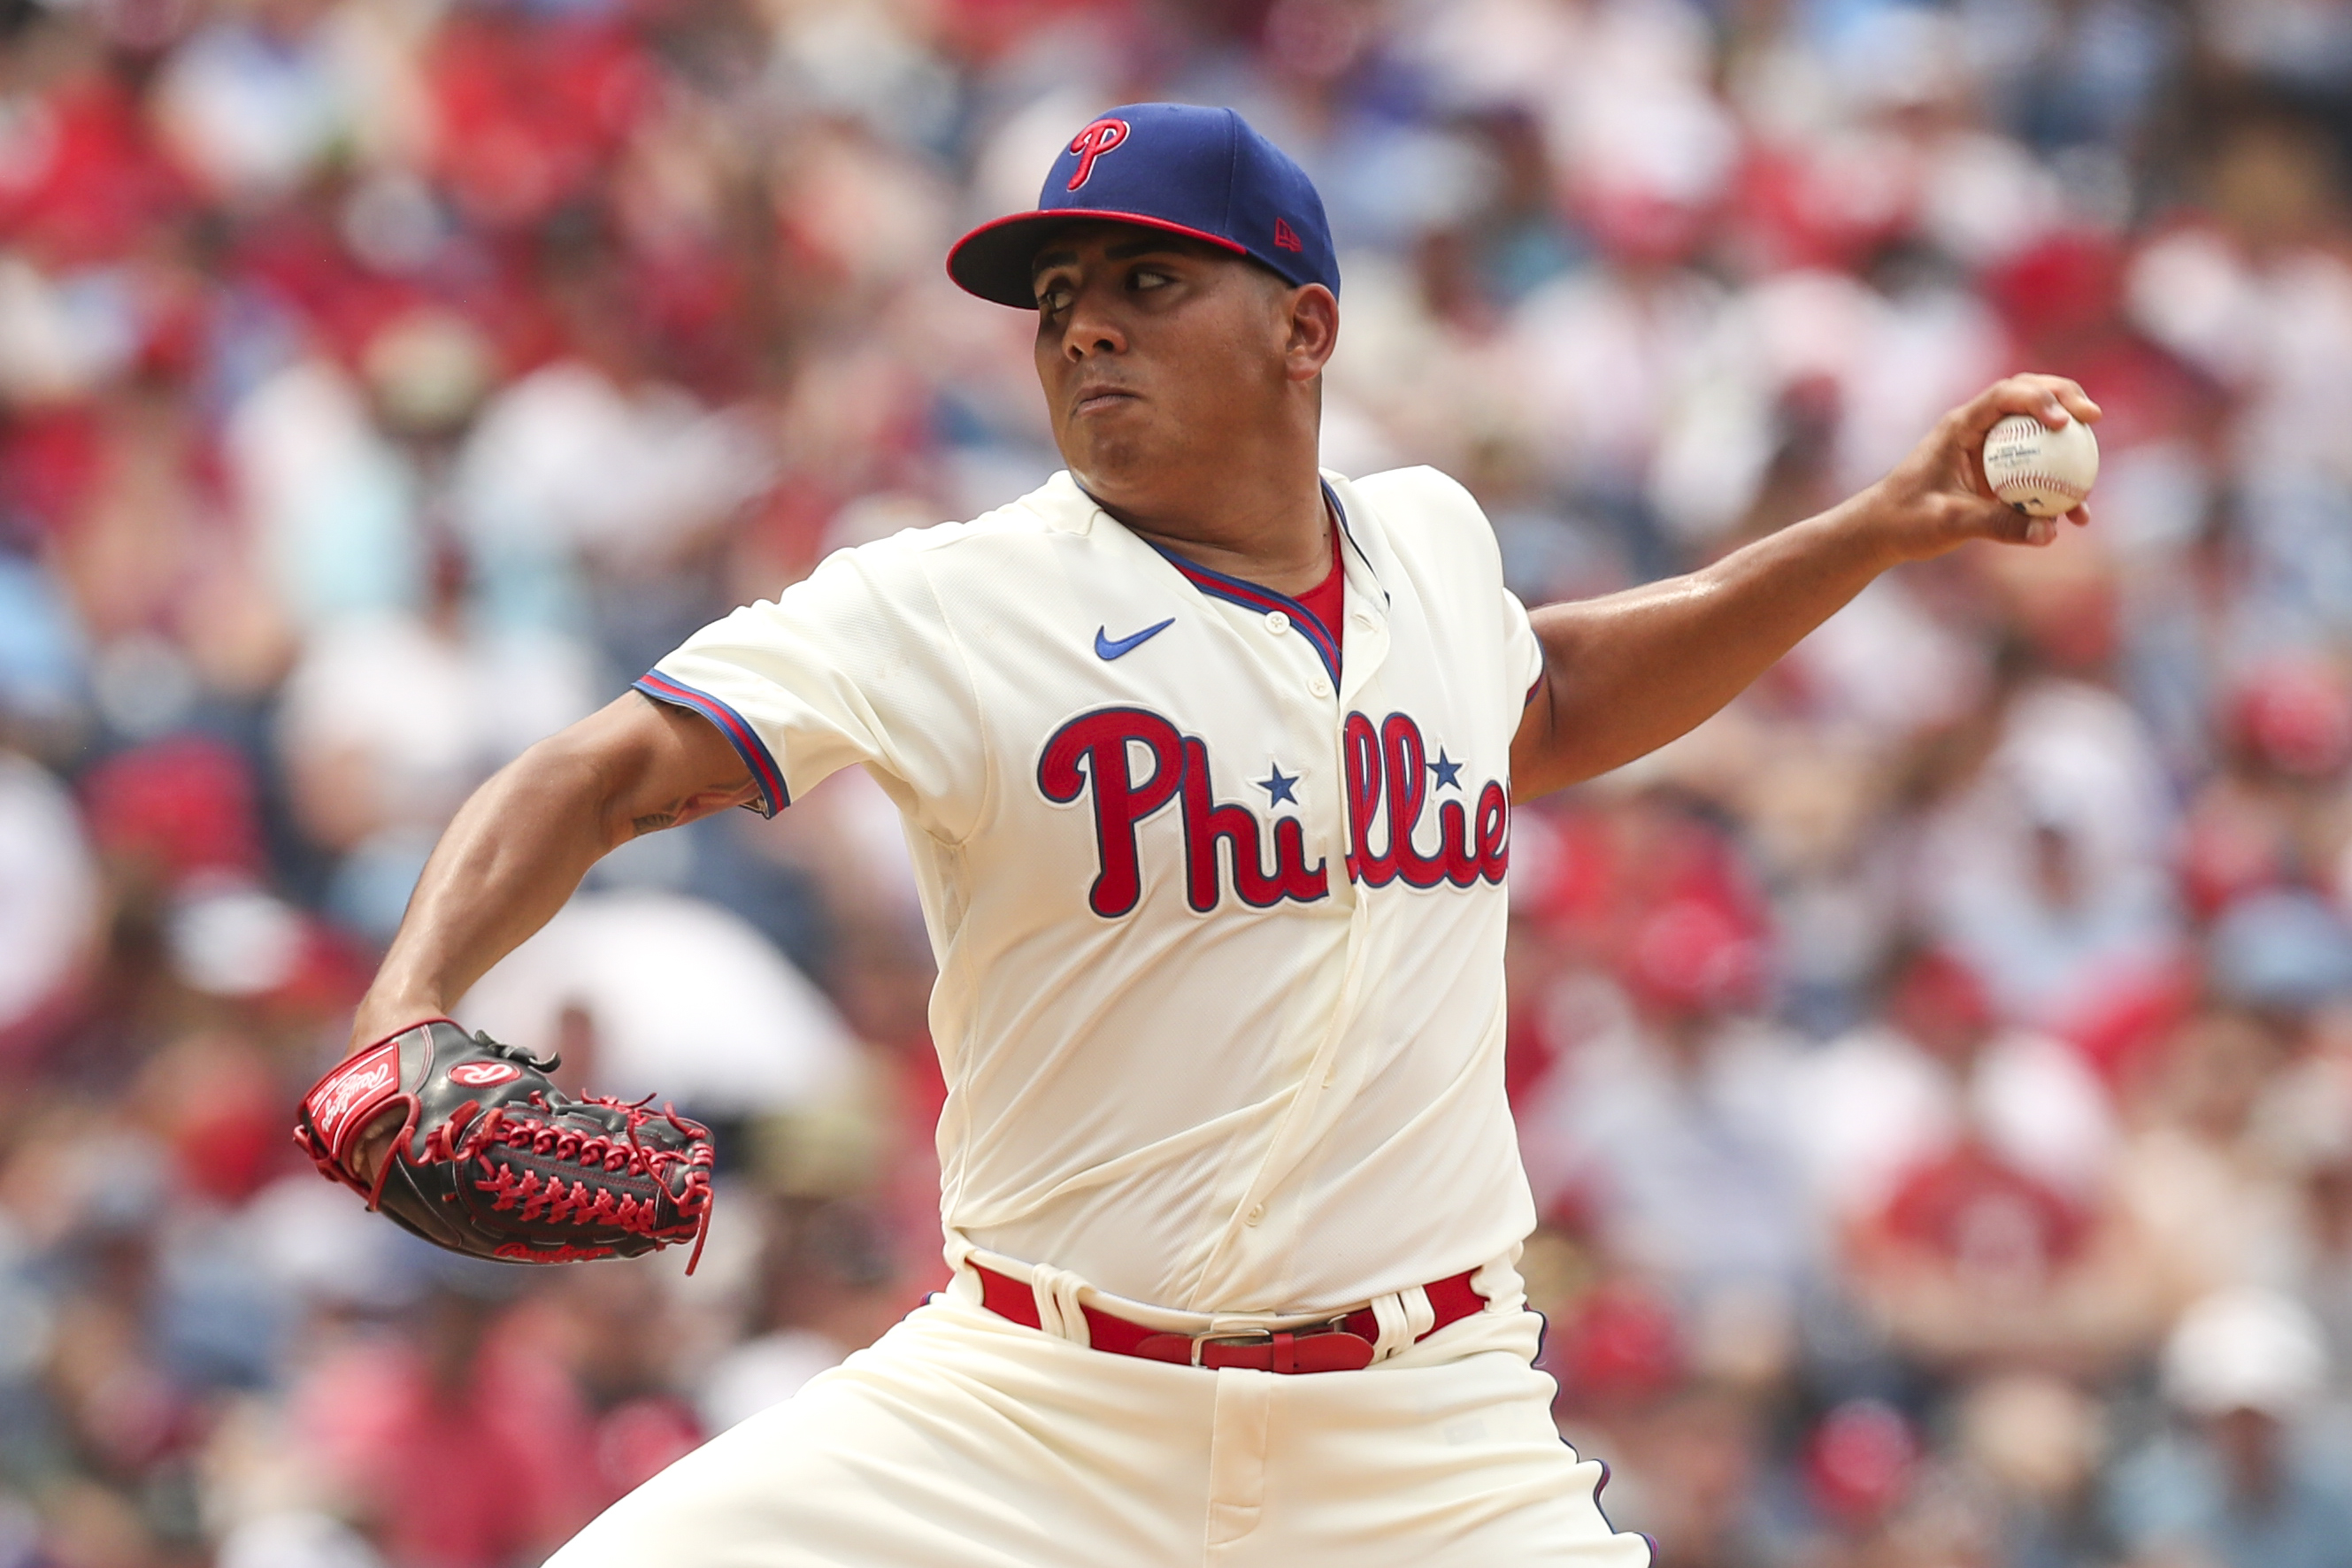 Ranger Suárez delivers six strong innings as Phillies down Cardinals   Phillies Nation - Your source for Philadelphia Phillies news, opinion,  history, rumors, events, and other fun stuff.